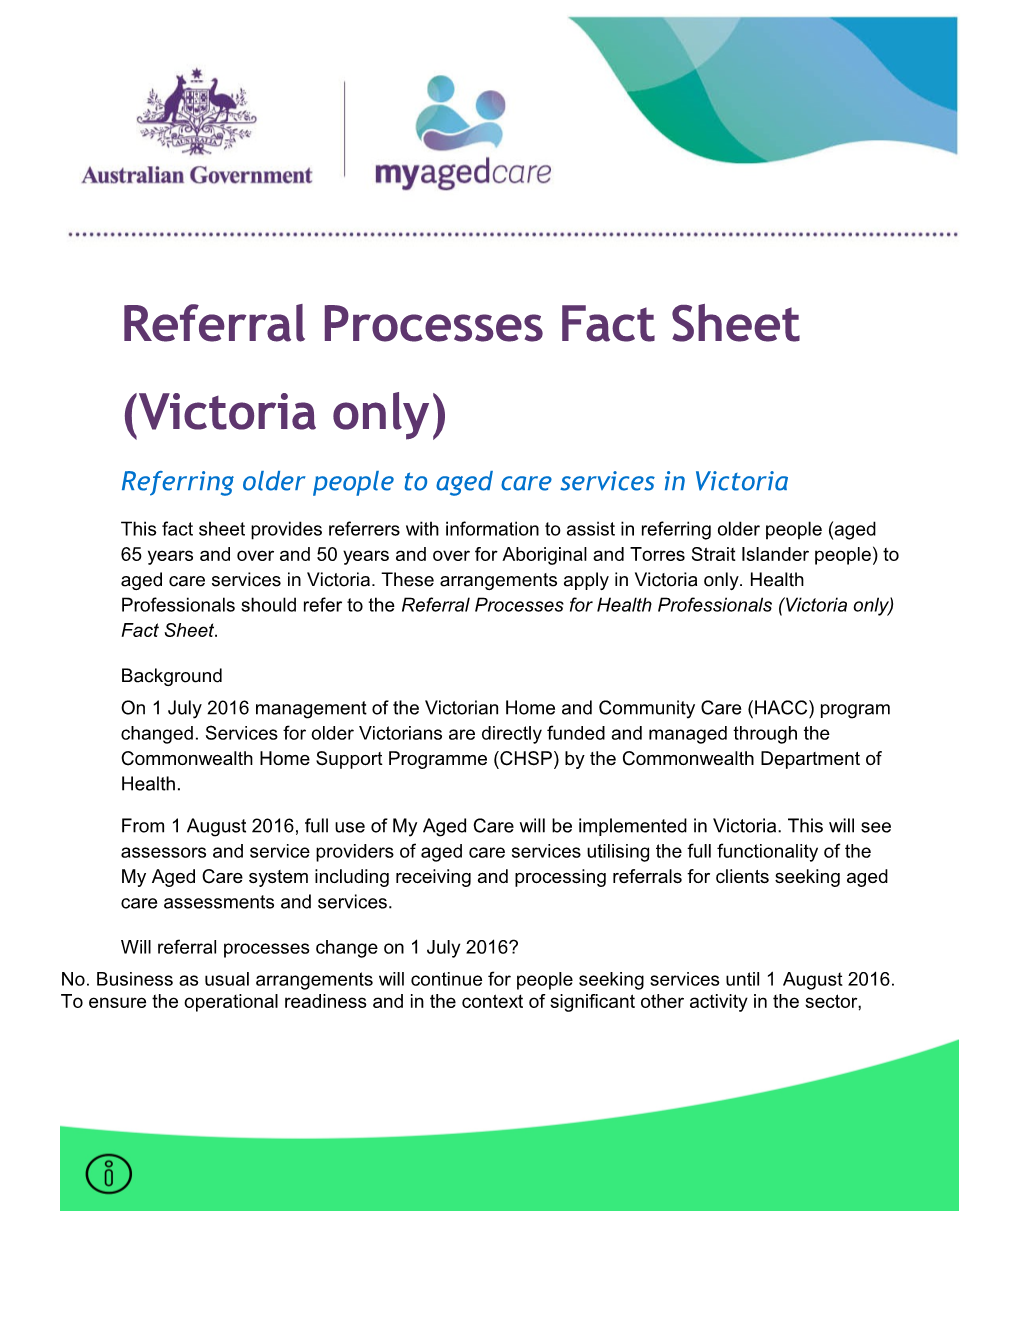 Referral Processes Fact Sheet